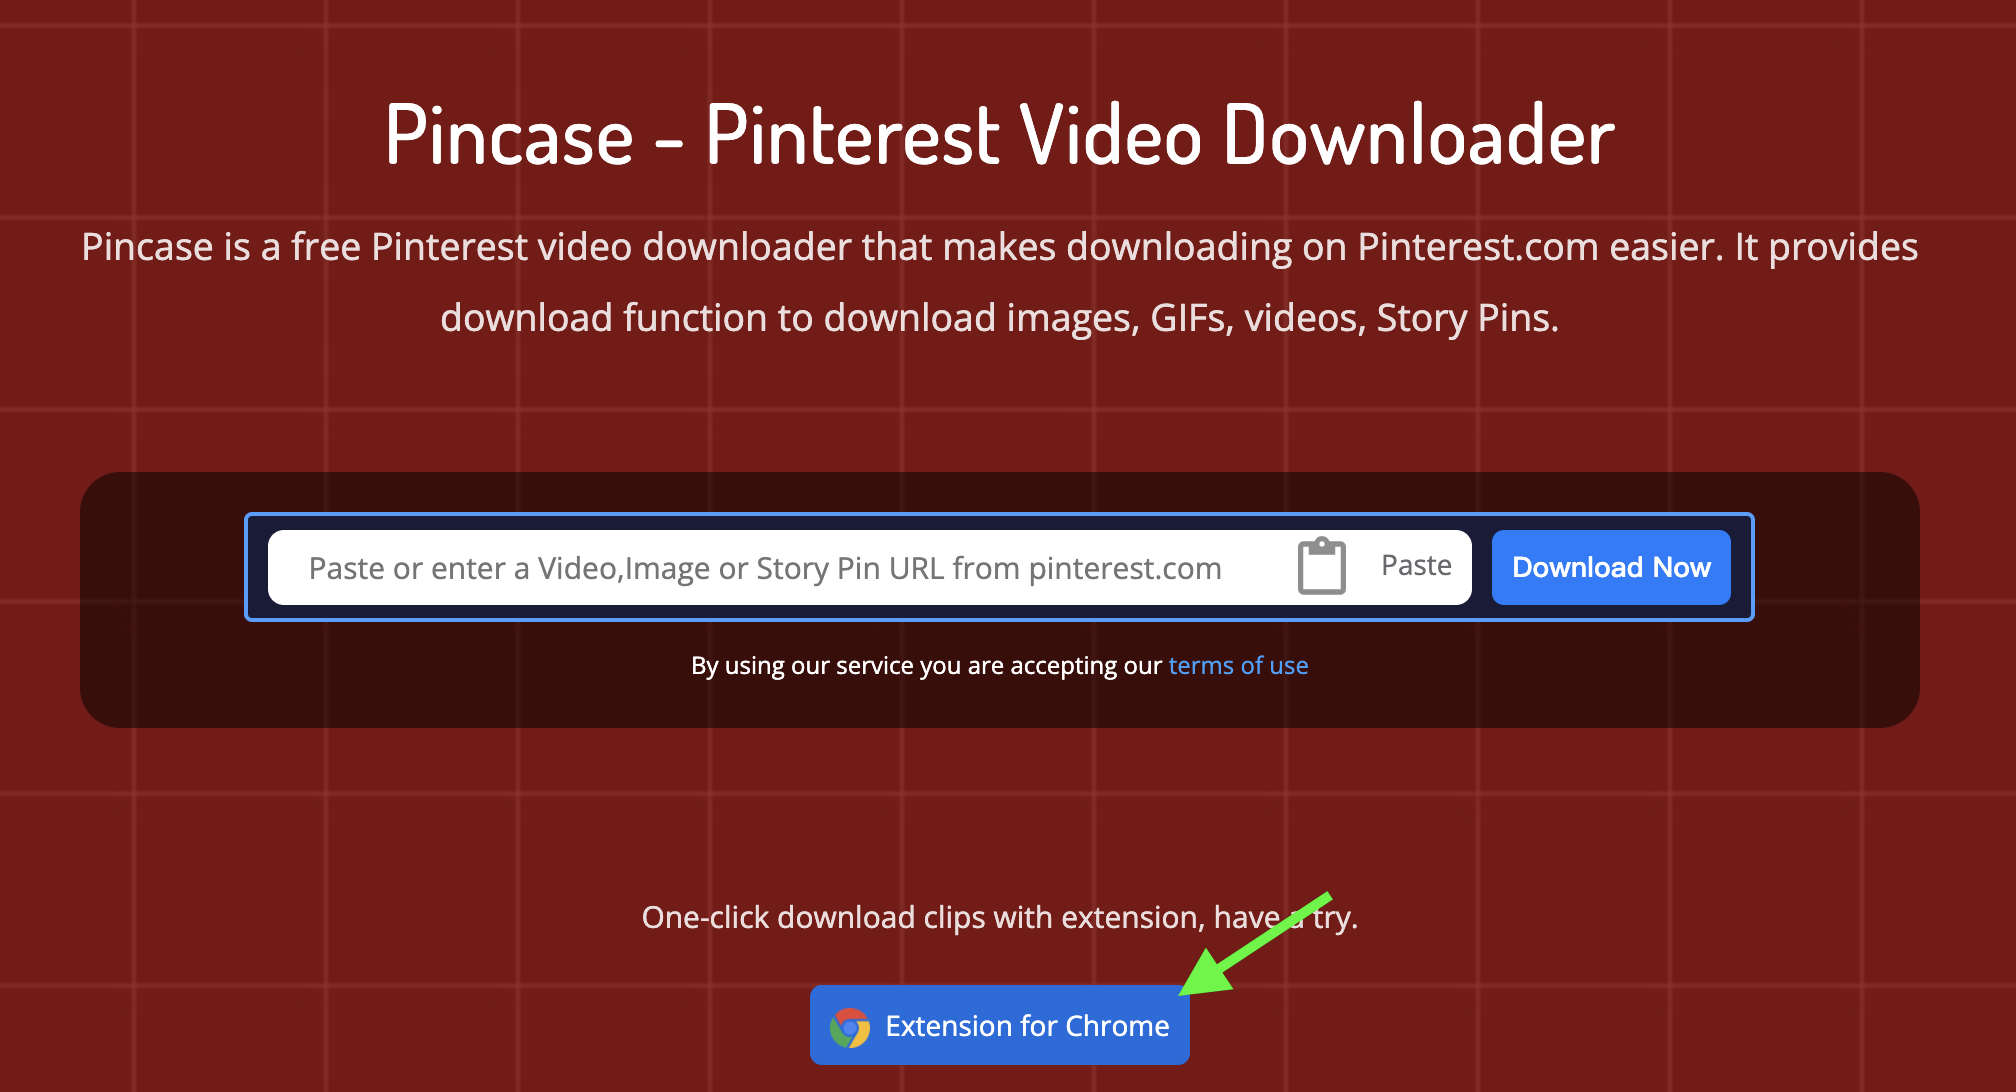 How to use the Pincase browser extension? 